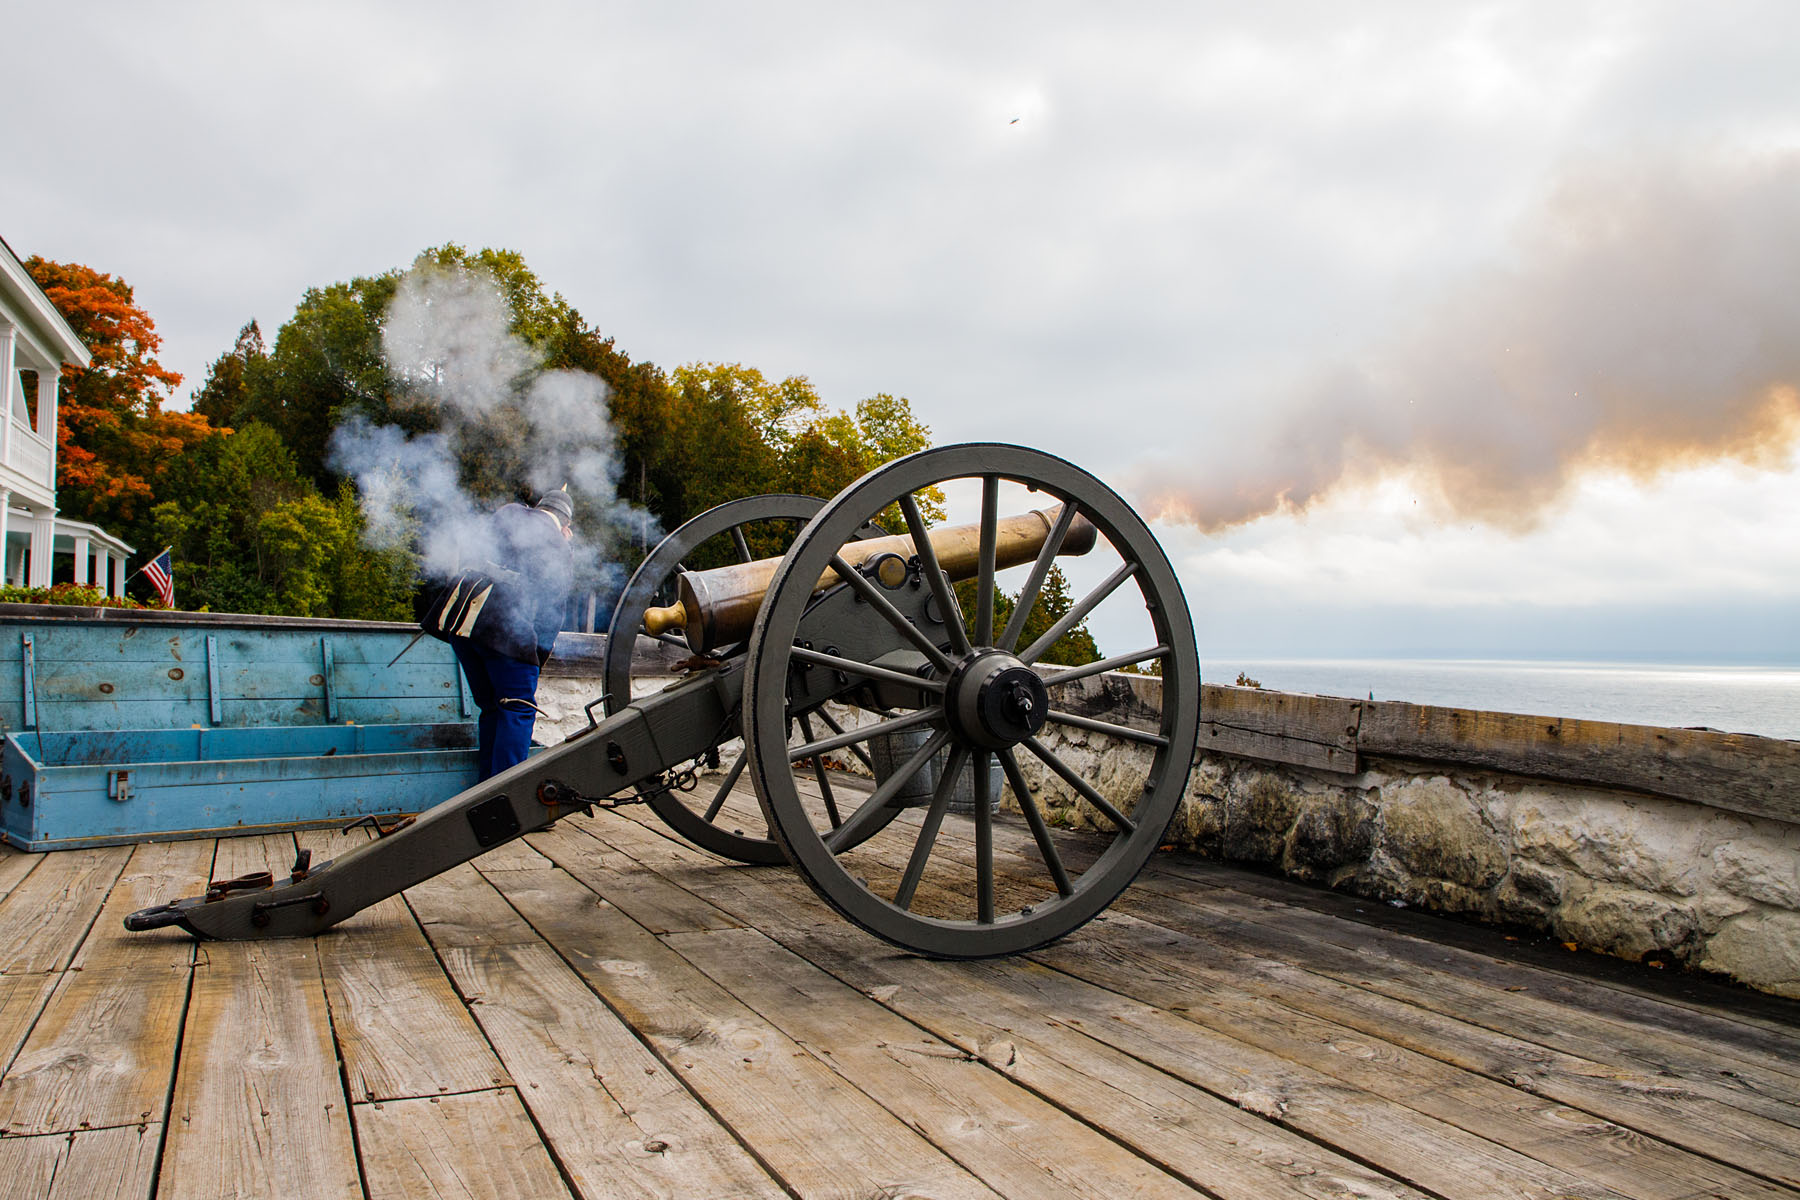 Cannon salute, Fort Mackinac, Michigan.  Click for next photo.